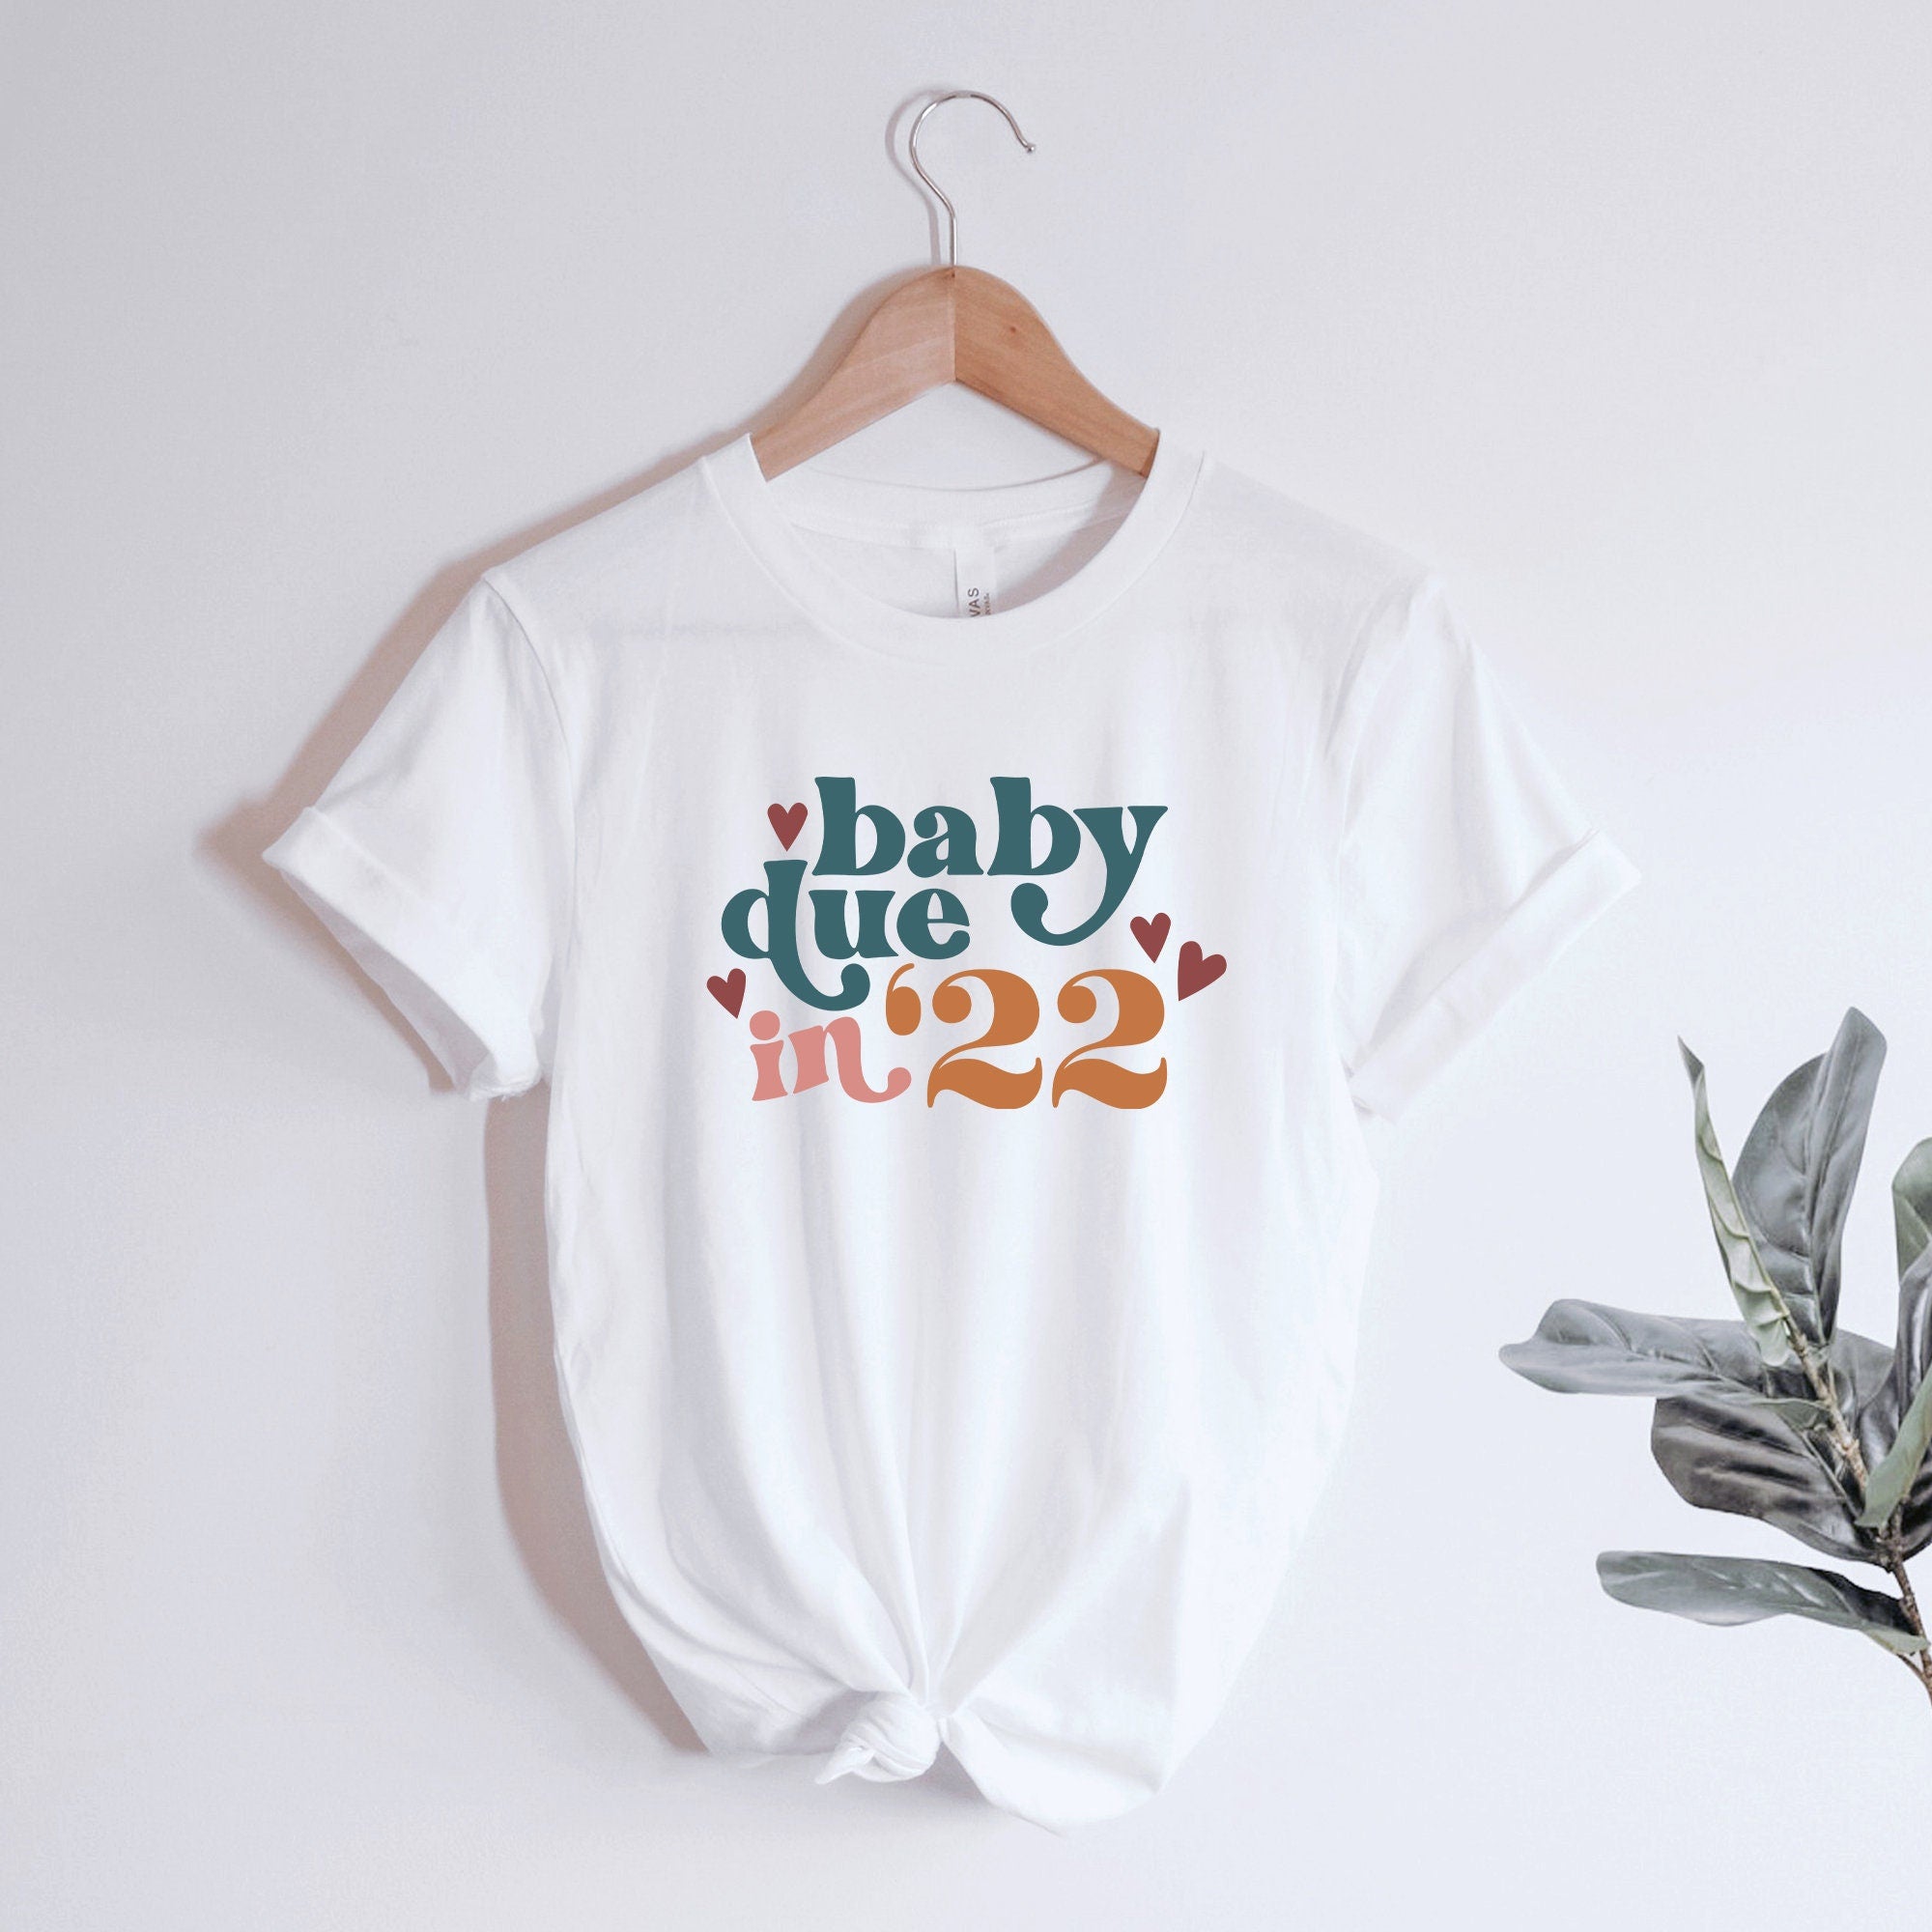 Baby Due in 2022 | Baby Announcement Shirt | Baby Reveal Bodysuit | Baby Shower Gift | Pregnancy Annoucement Shirt